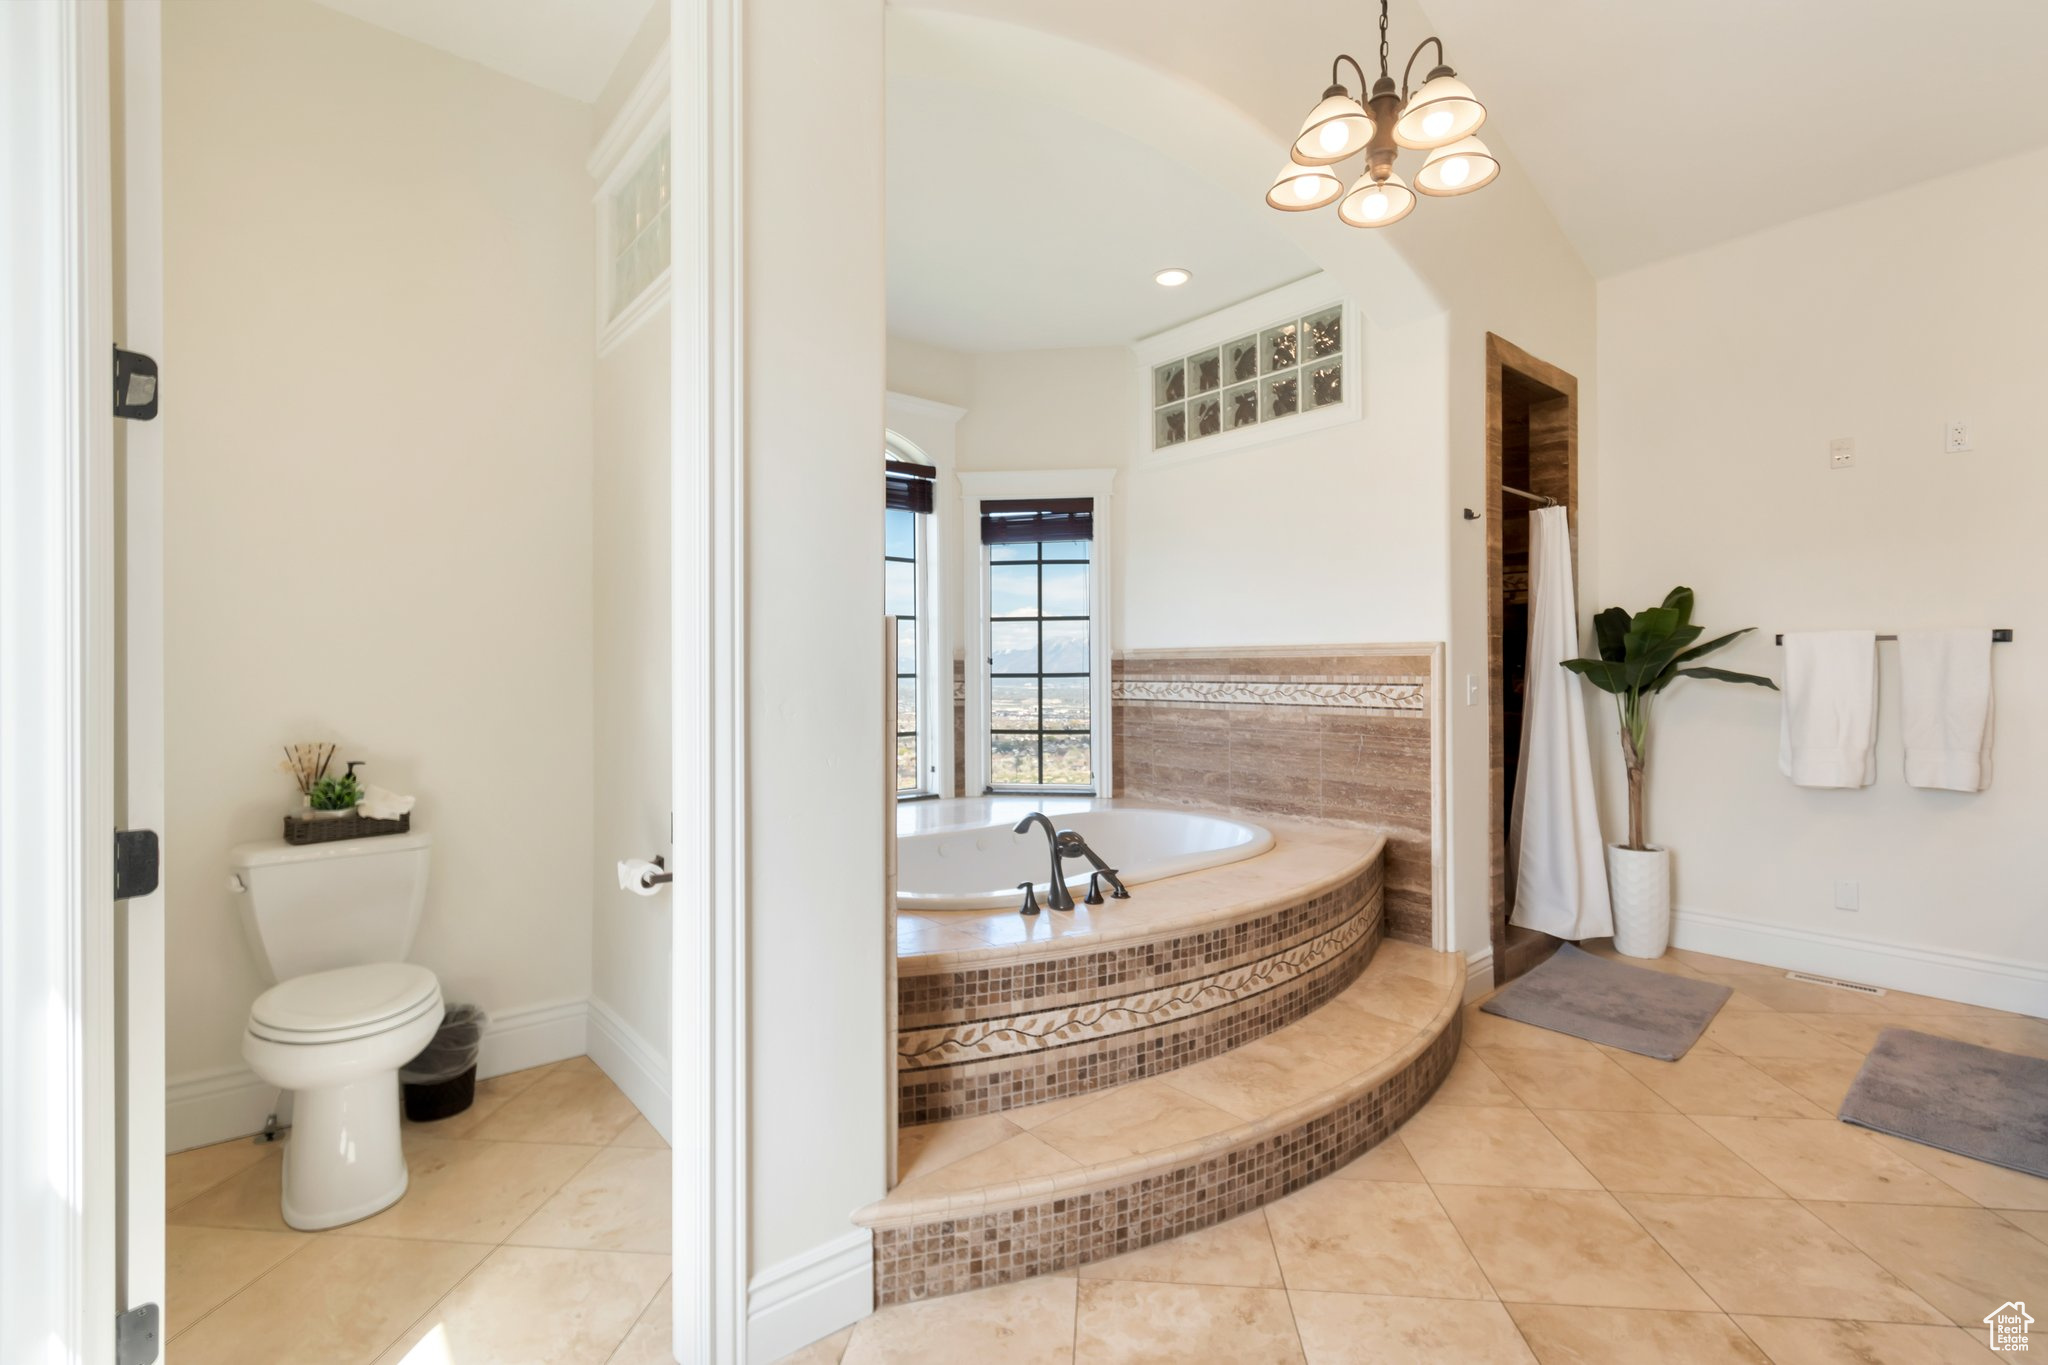 Bathroom featuring a notable chandelier, tile floors, toilet, and tiled tub